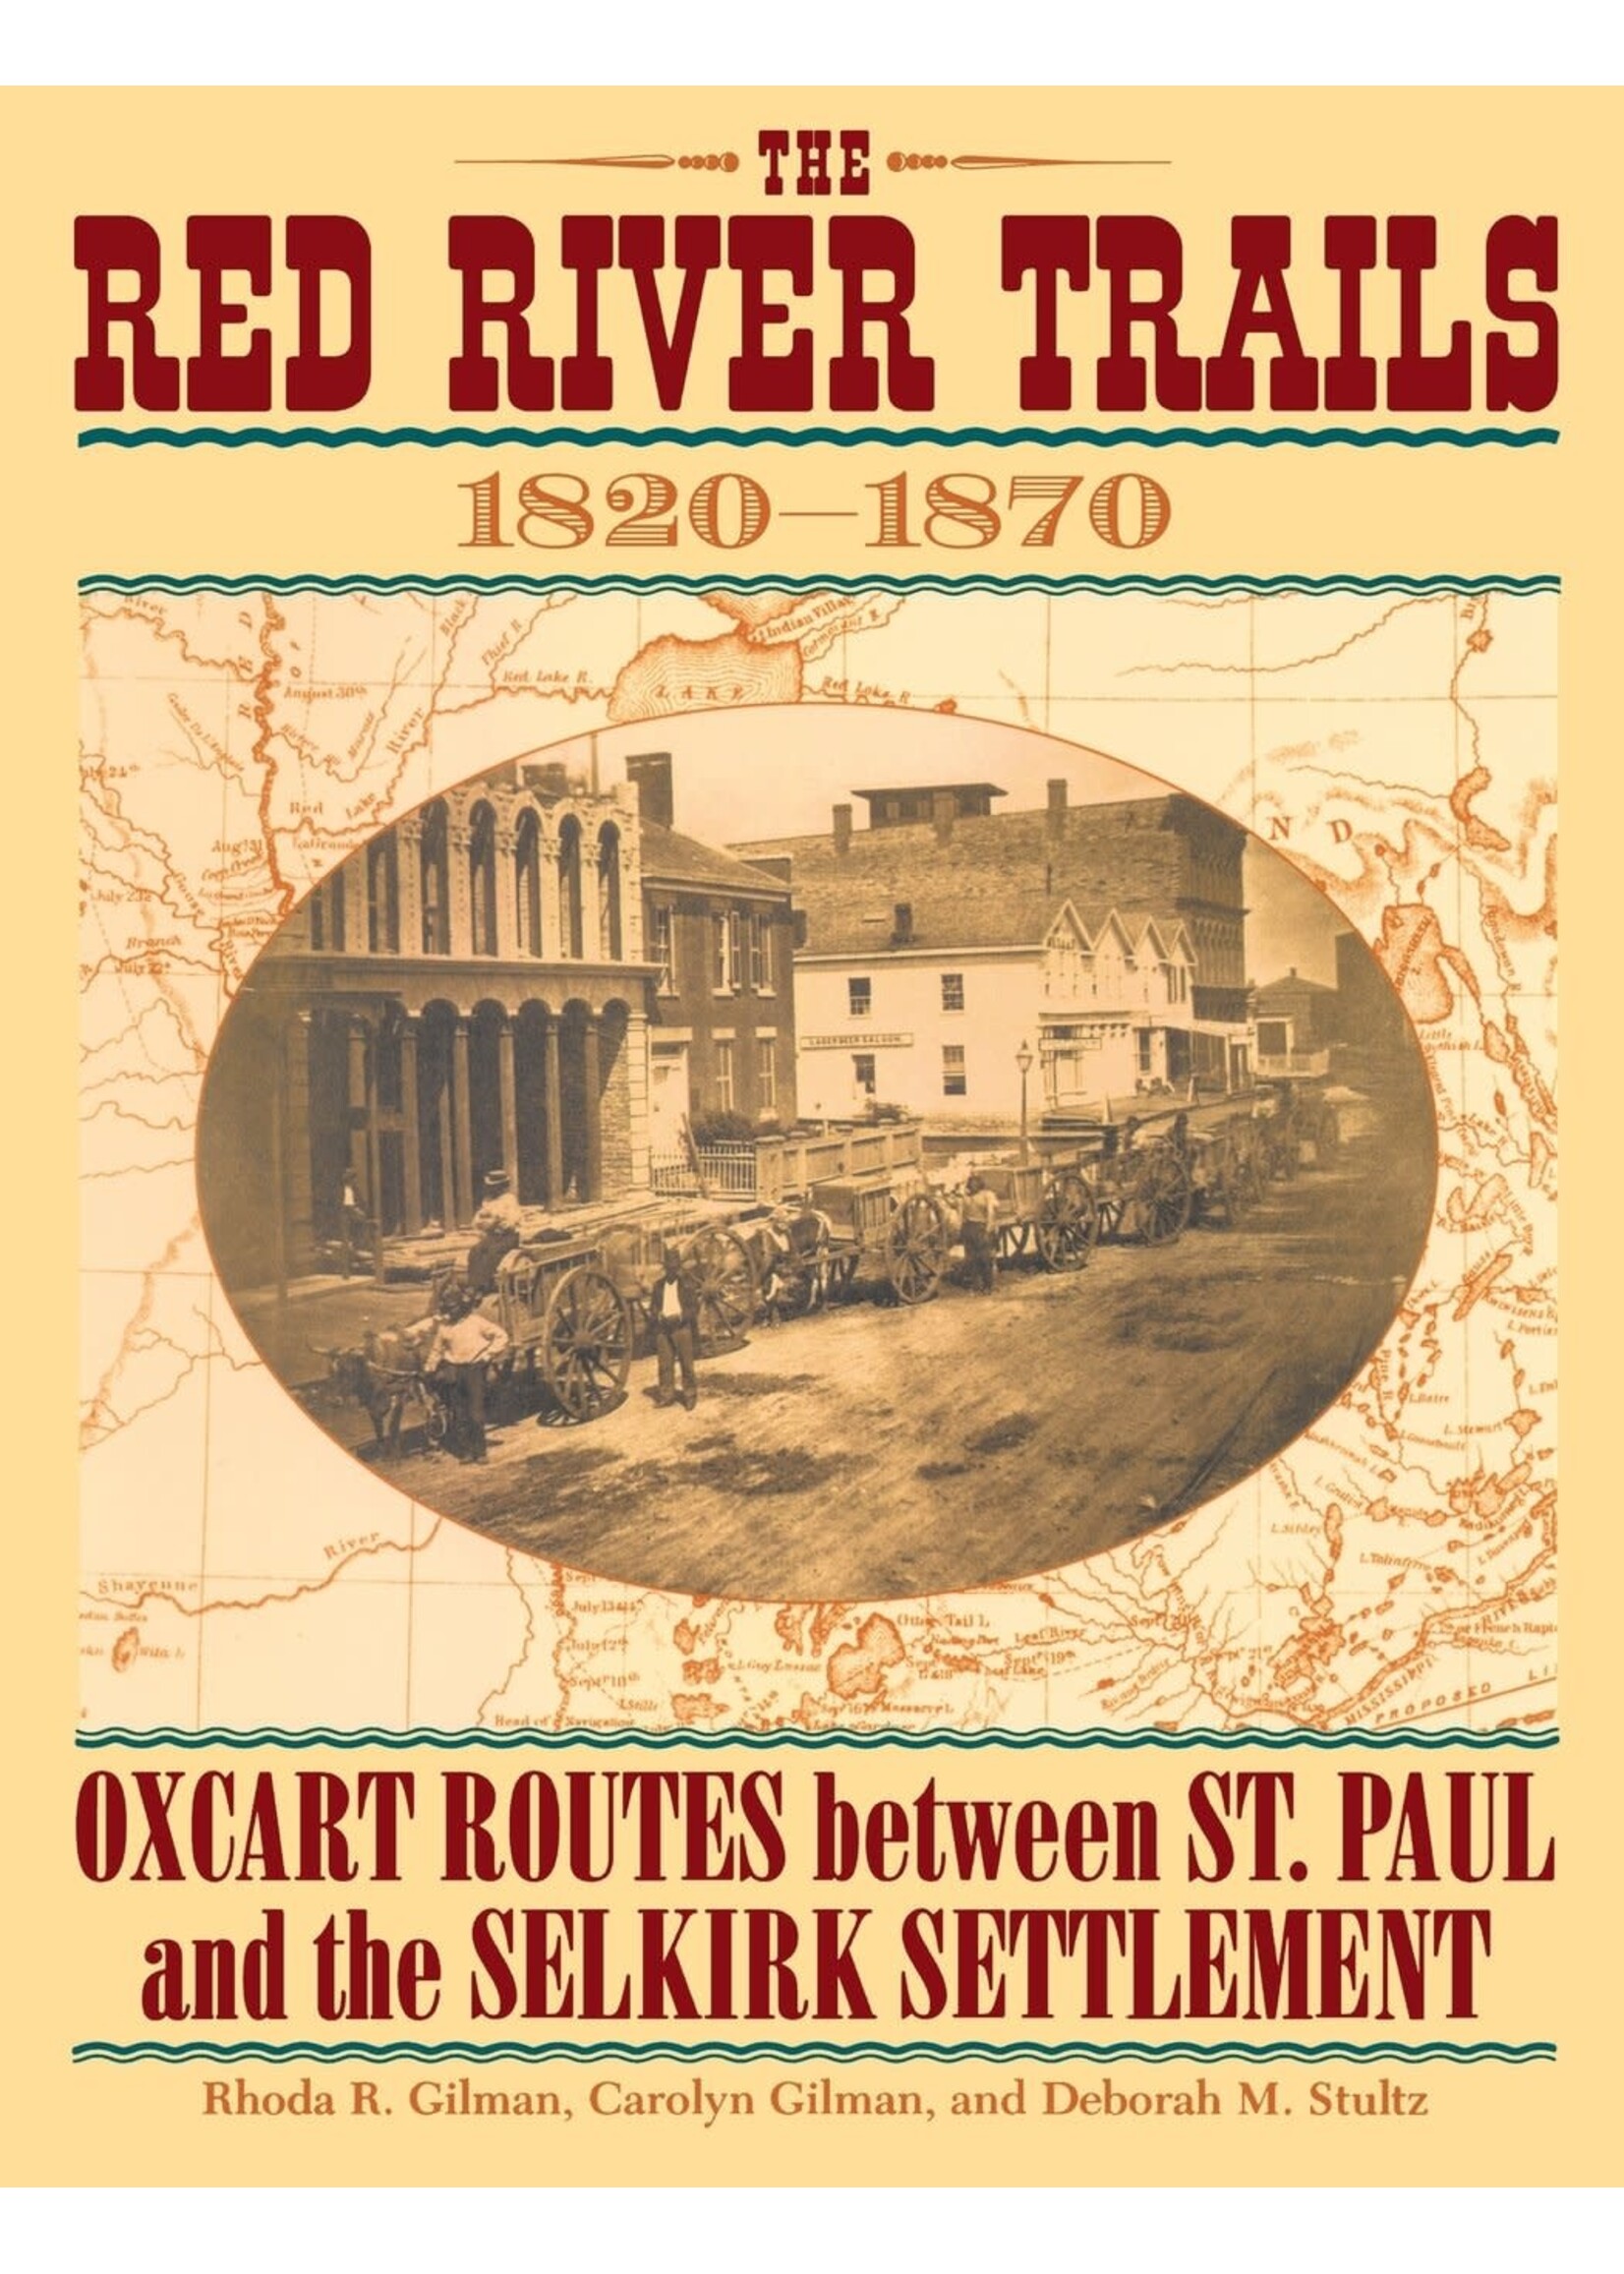 The Red River Trails: Oxcart Routes Between St Paul and the Selkirk Settlement 1820-1870